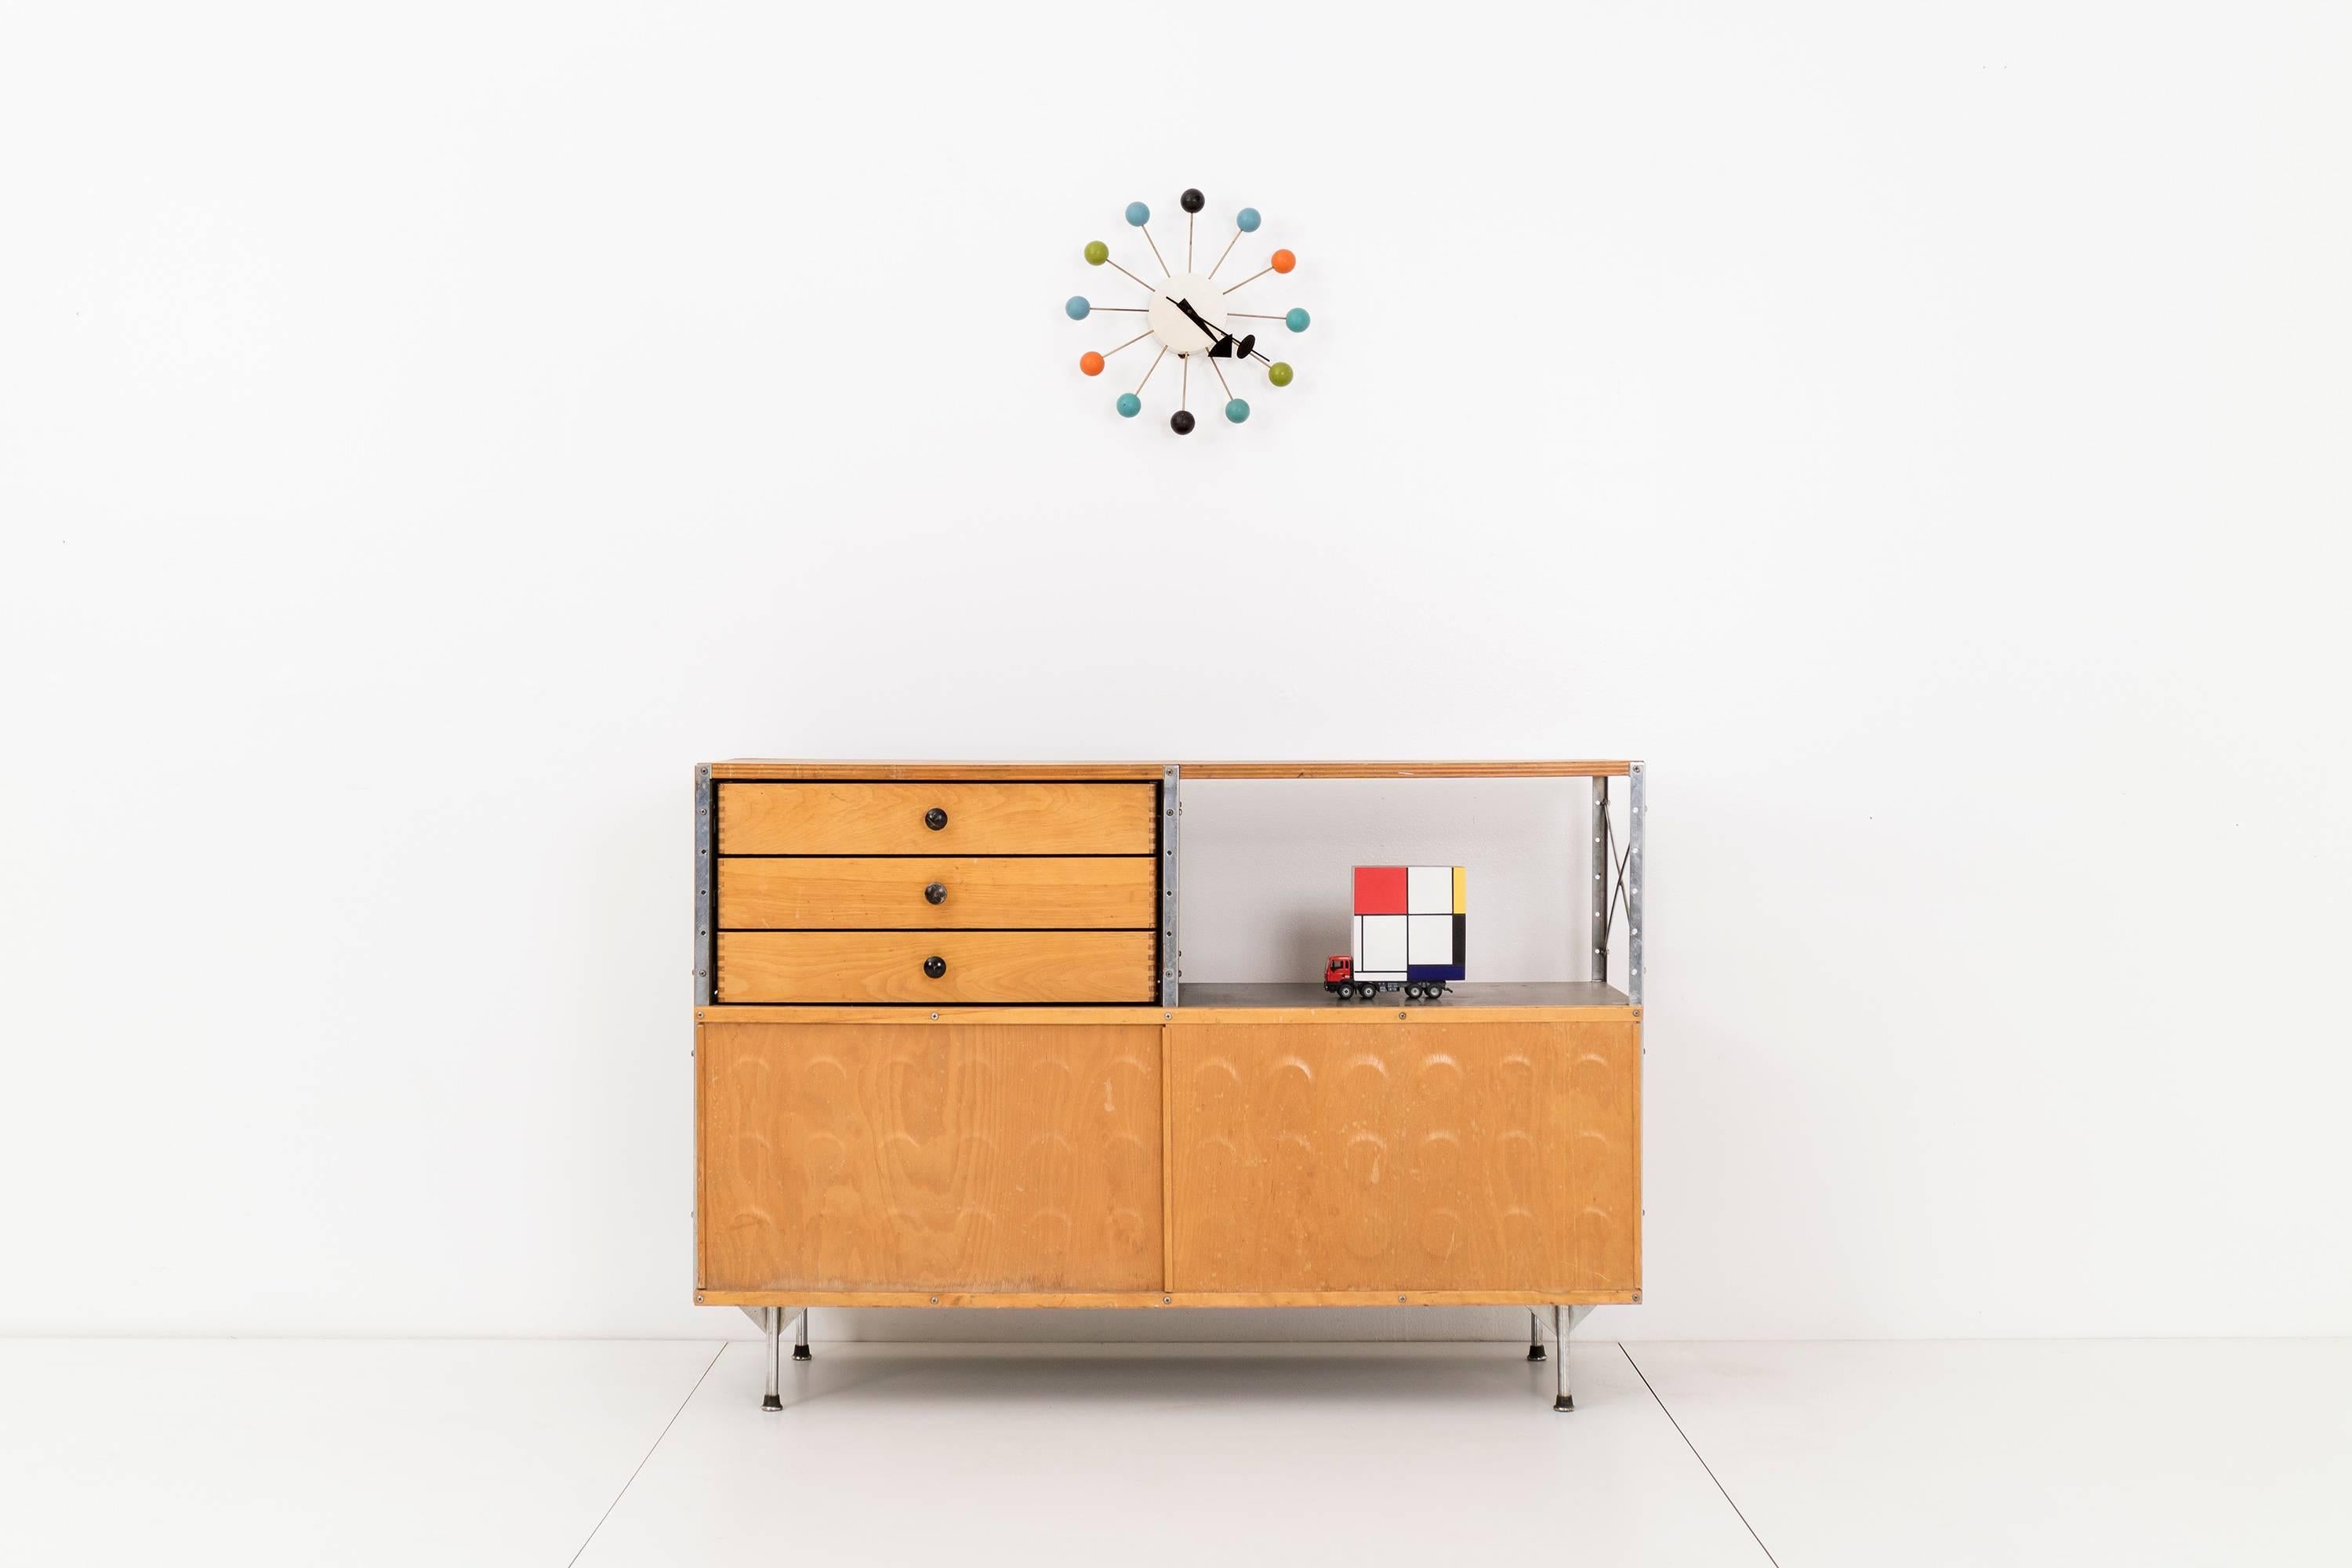 Charles and Ray Eames for Herman Miller. Model 220-N. This storage unit has a zinc-coated steel frame, maple-top and painted hardboards. Features three drawers and sliding preset plywood dimple doors to conceal storage. Top is damaged due to water